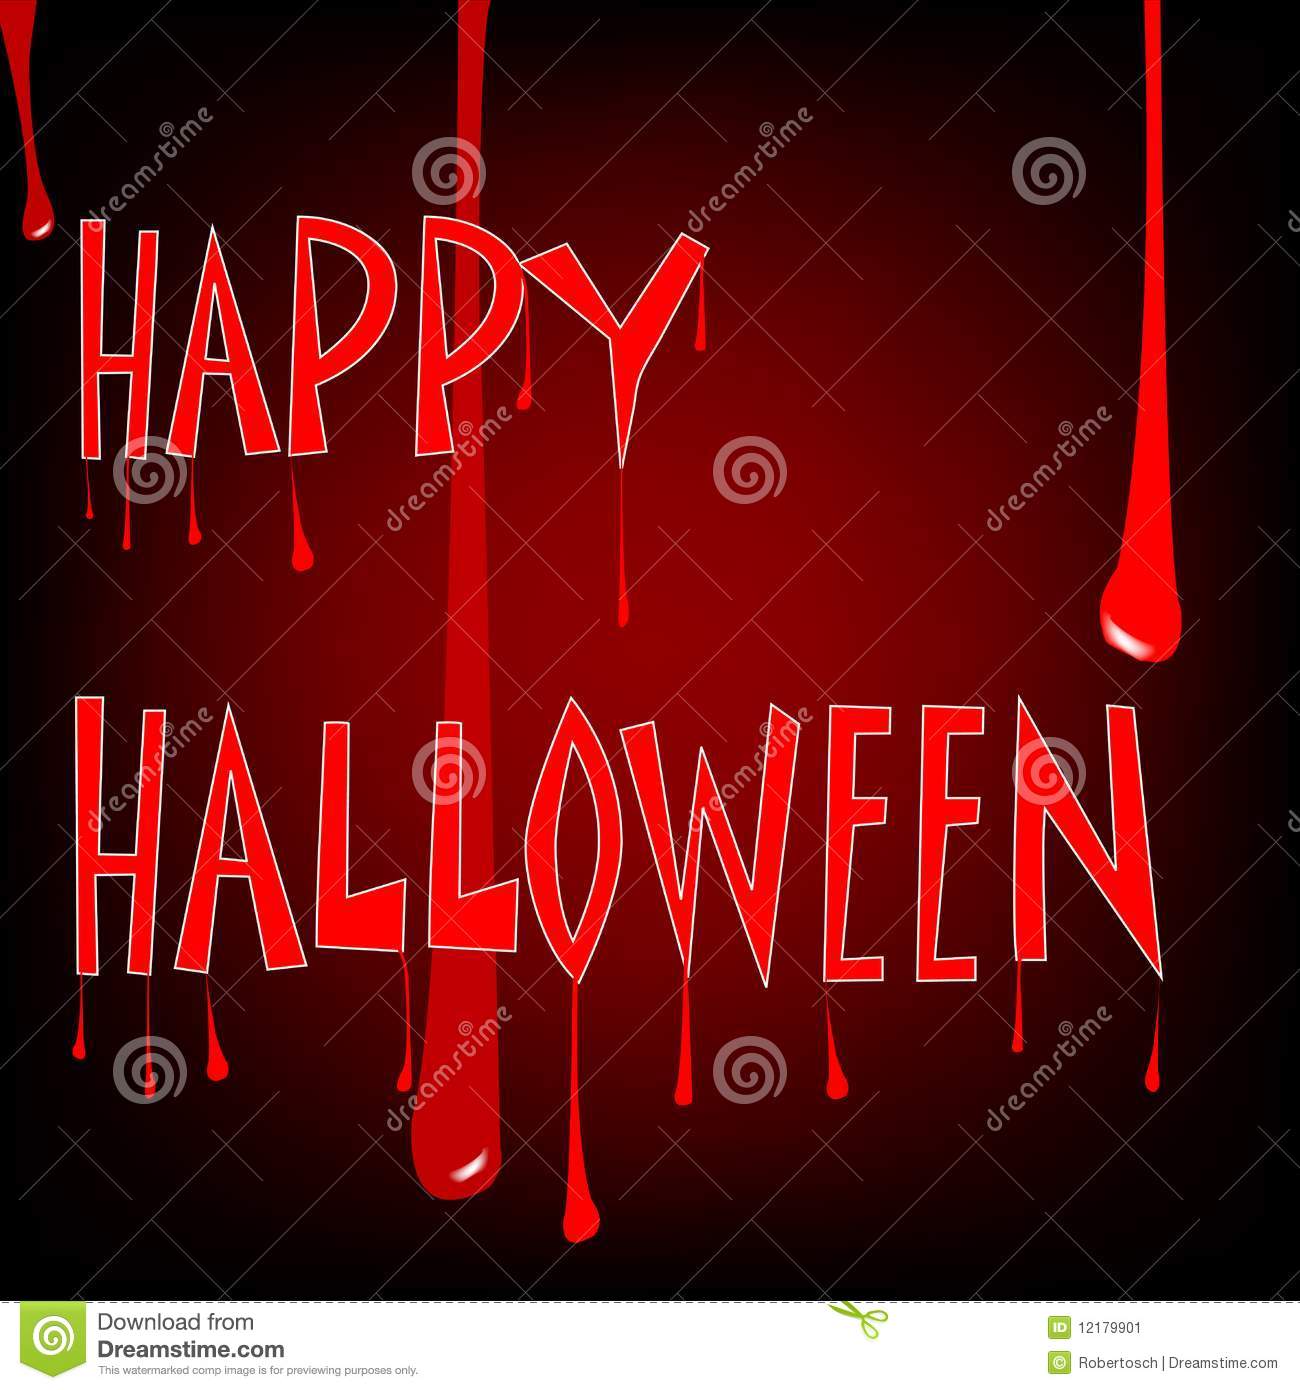 Bloody Halloween Vector Art Illustration  More Drawings In My Gallery